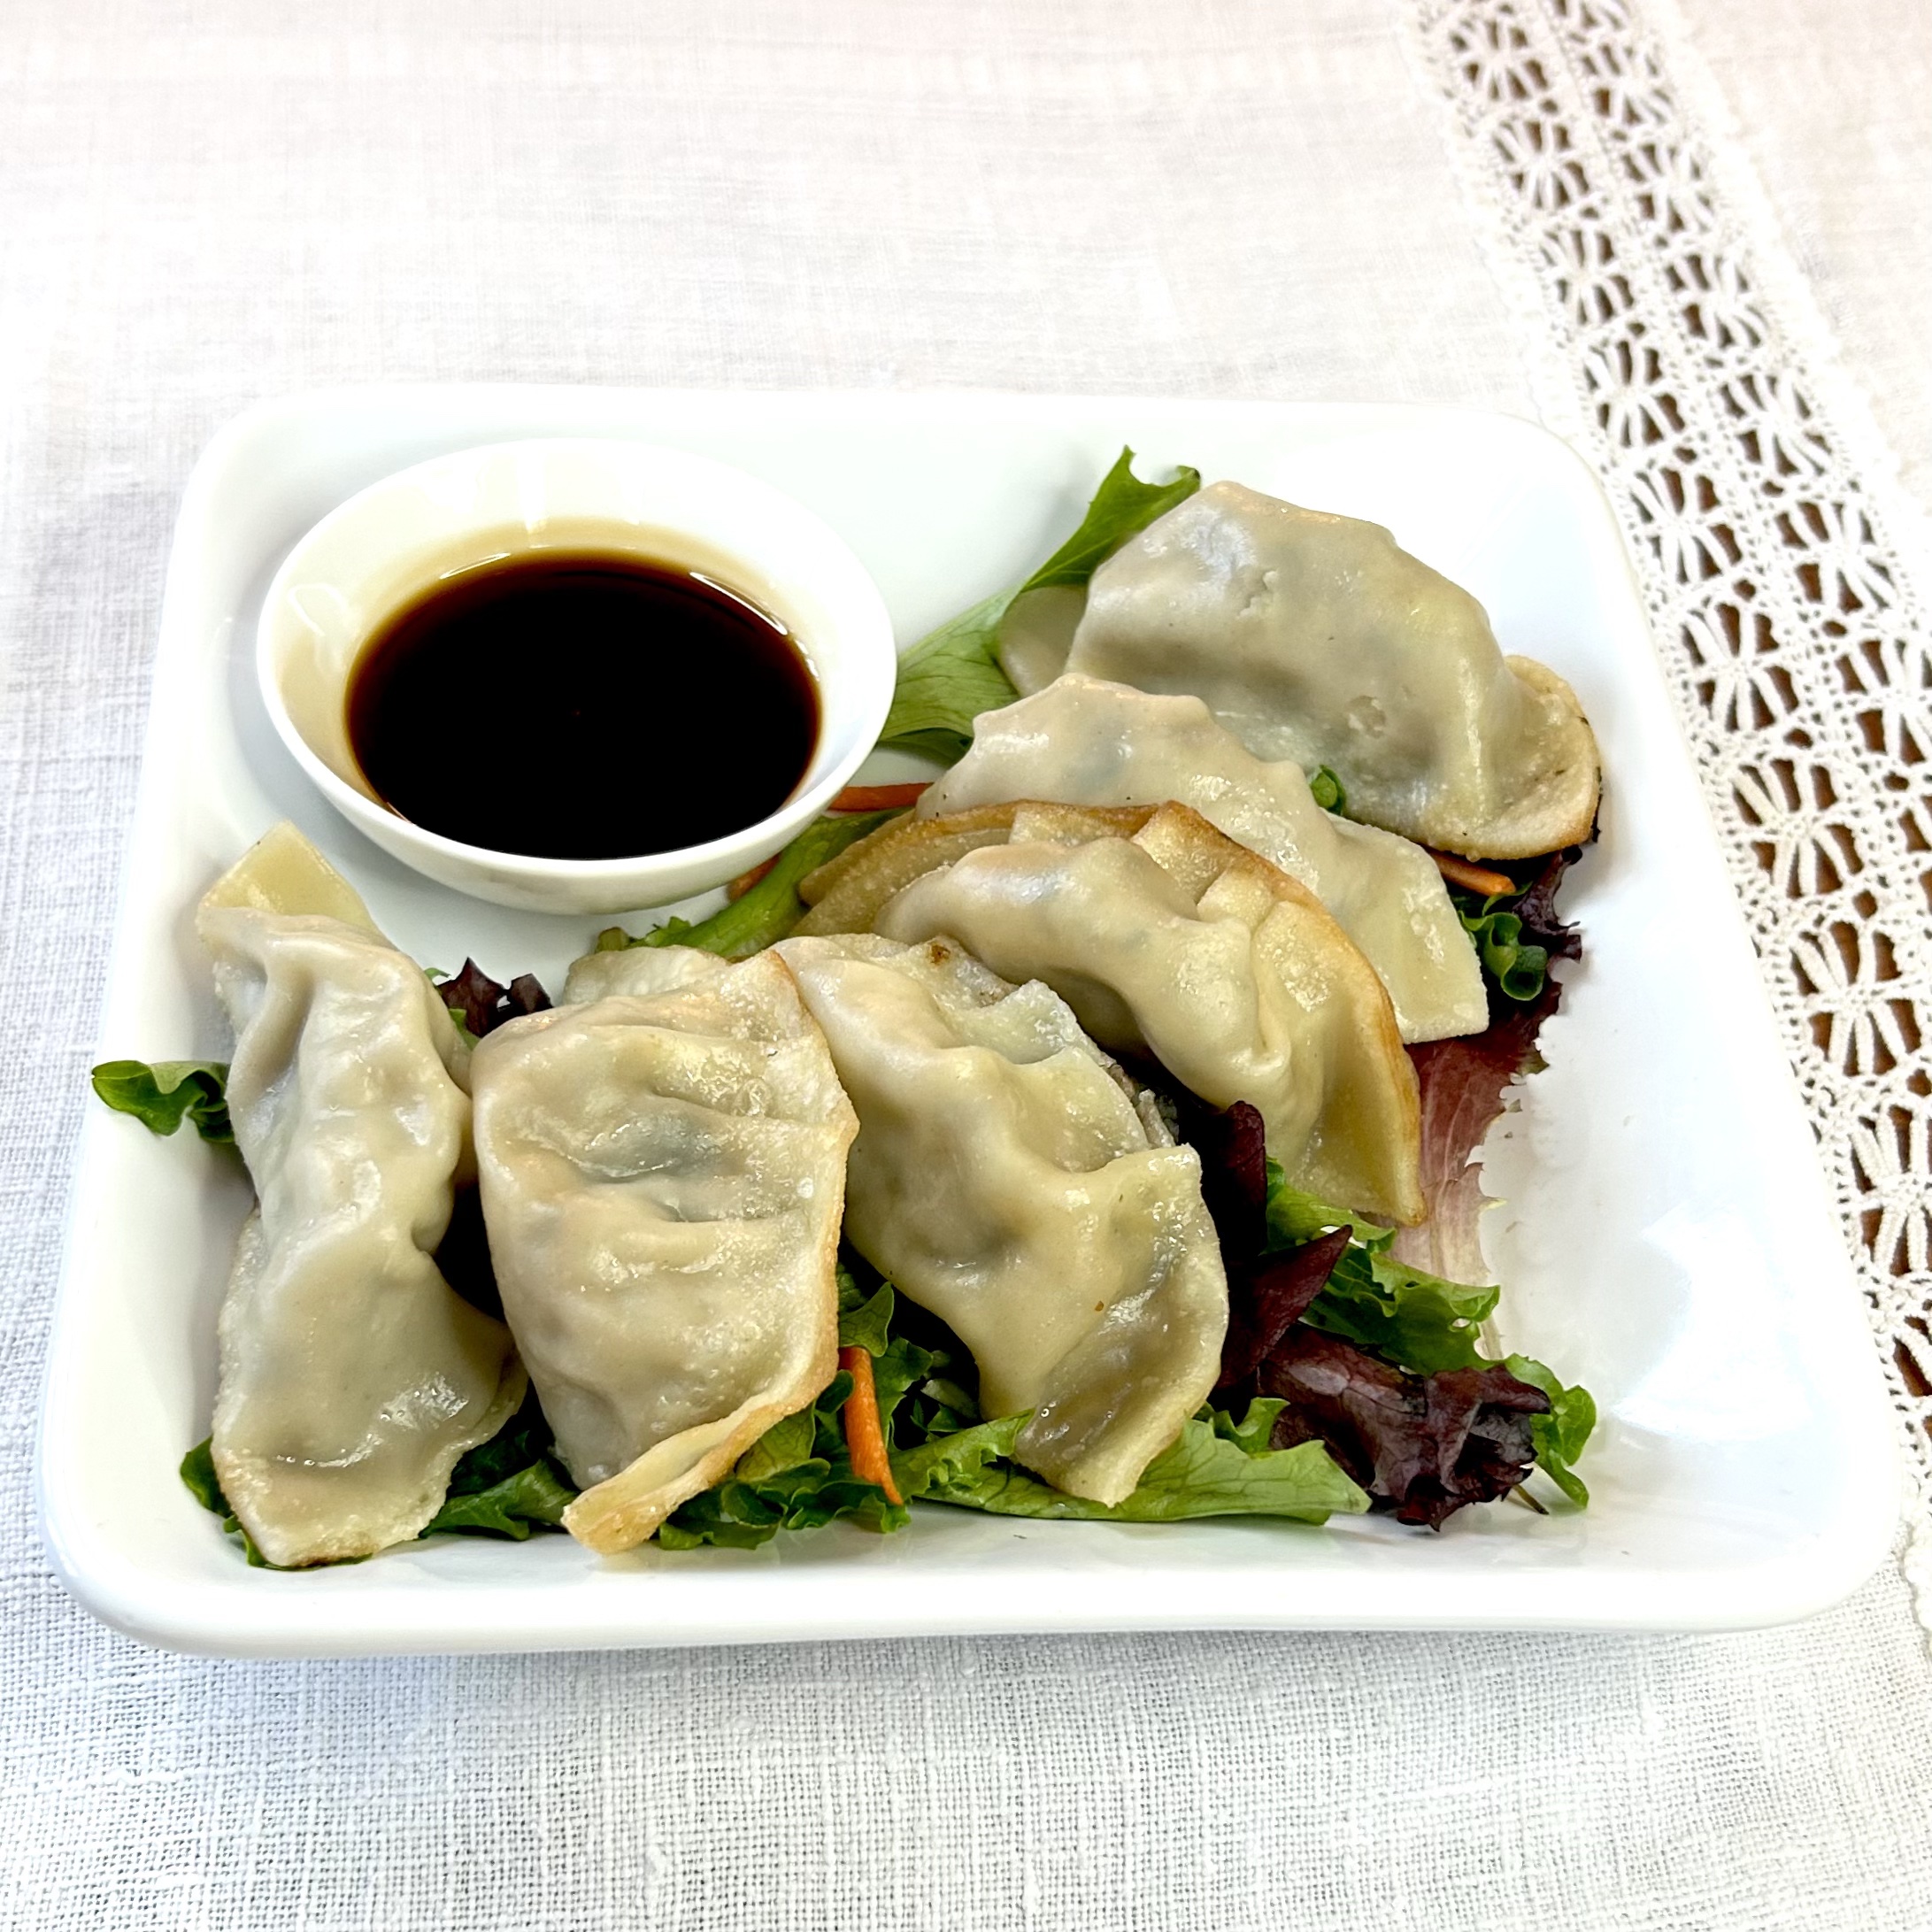 traditional asian style potstickers made by APM professional chefs. Available in lemon grass chicken, pork, shrimp, and kimchi varieties.